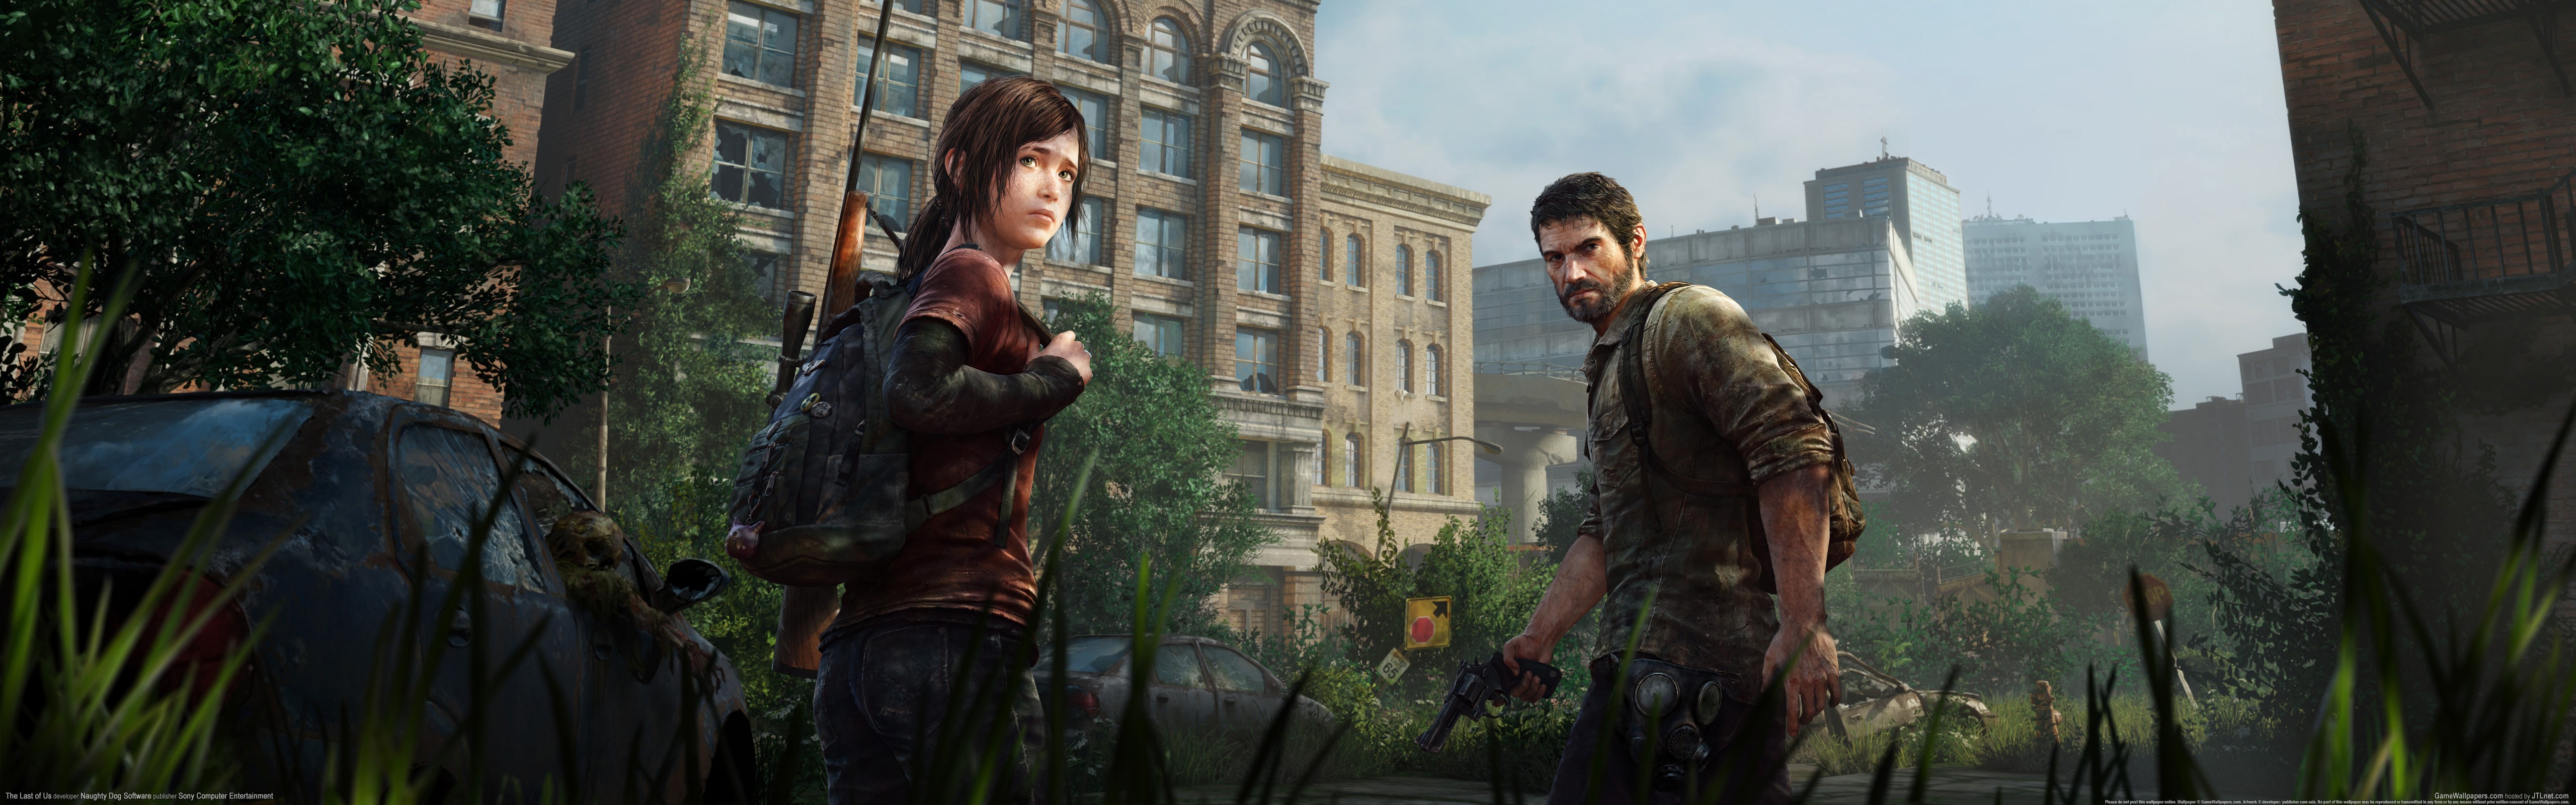 The Last Of Us Game 5k Hd Games 4k Wallpapers Images Backgrounds Photos And Pictures